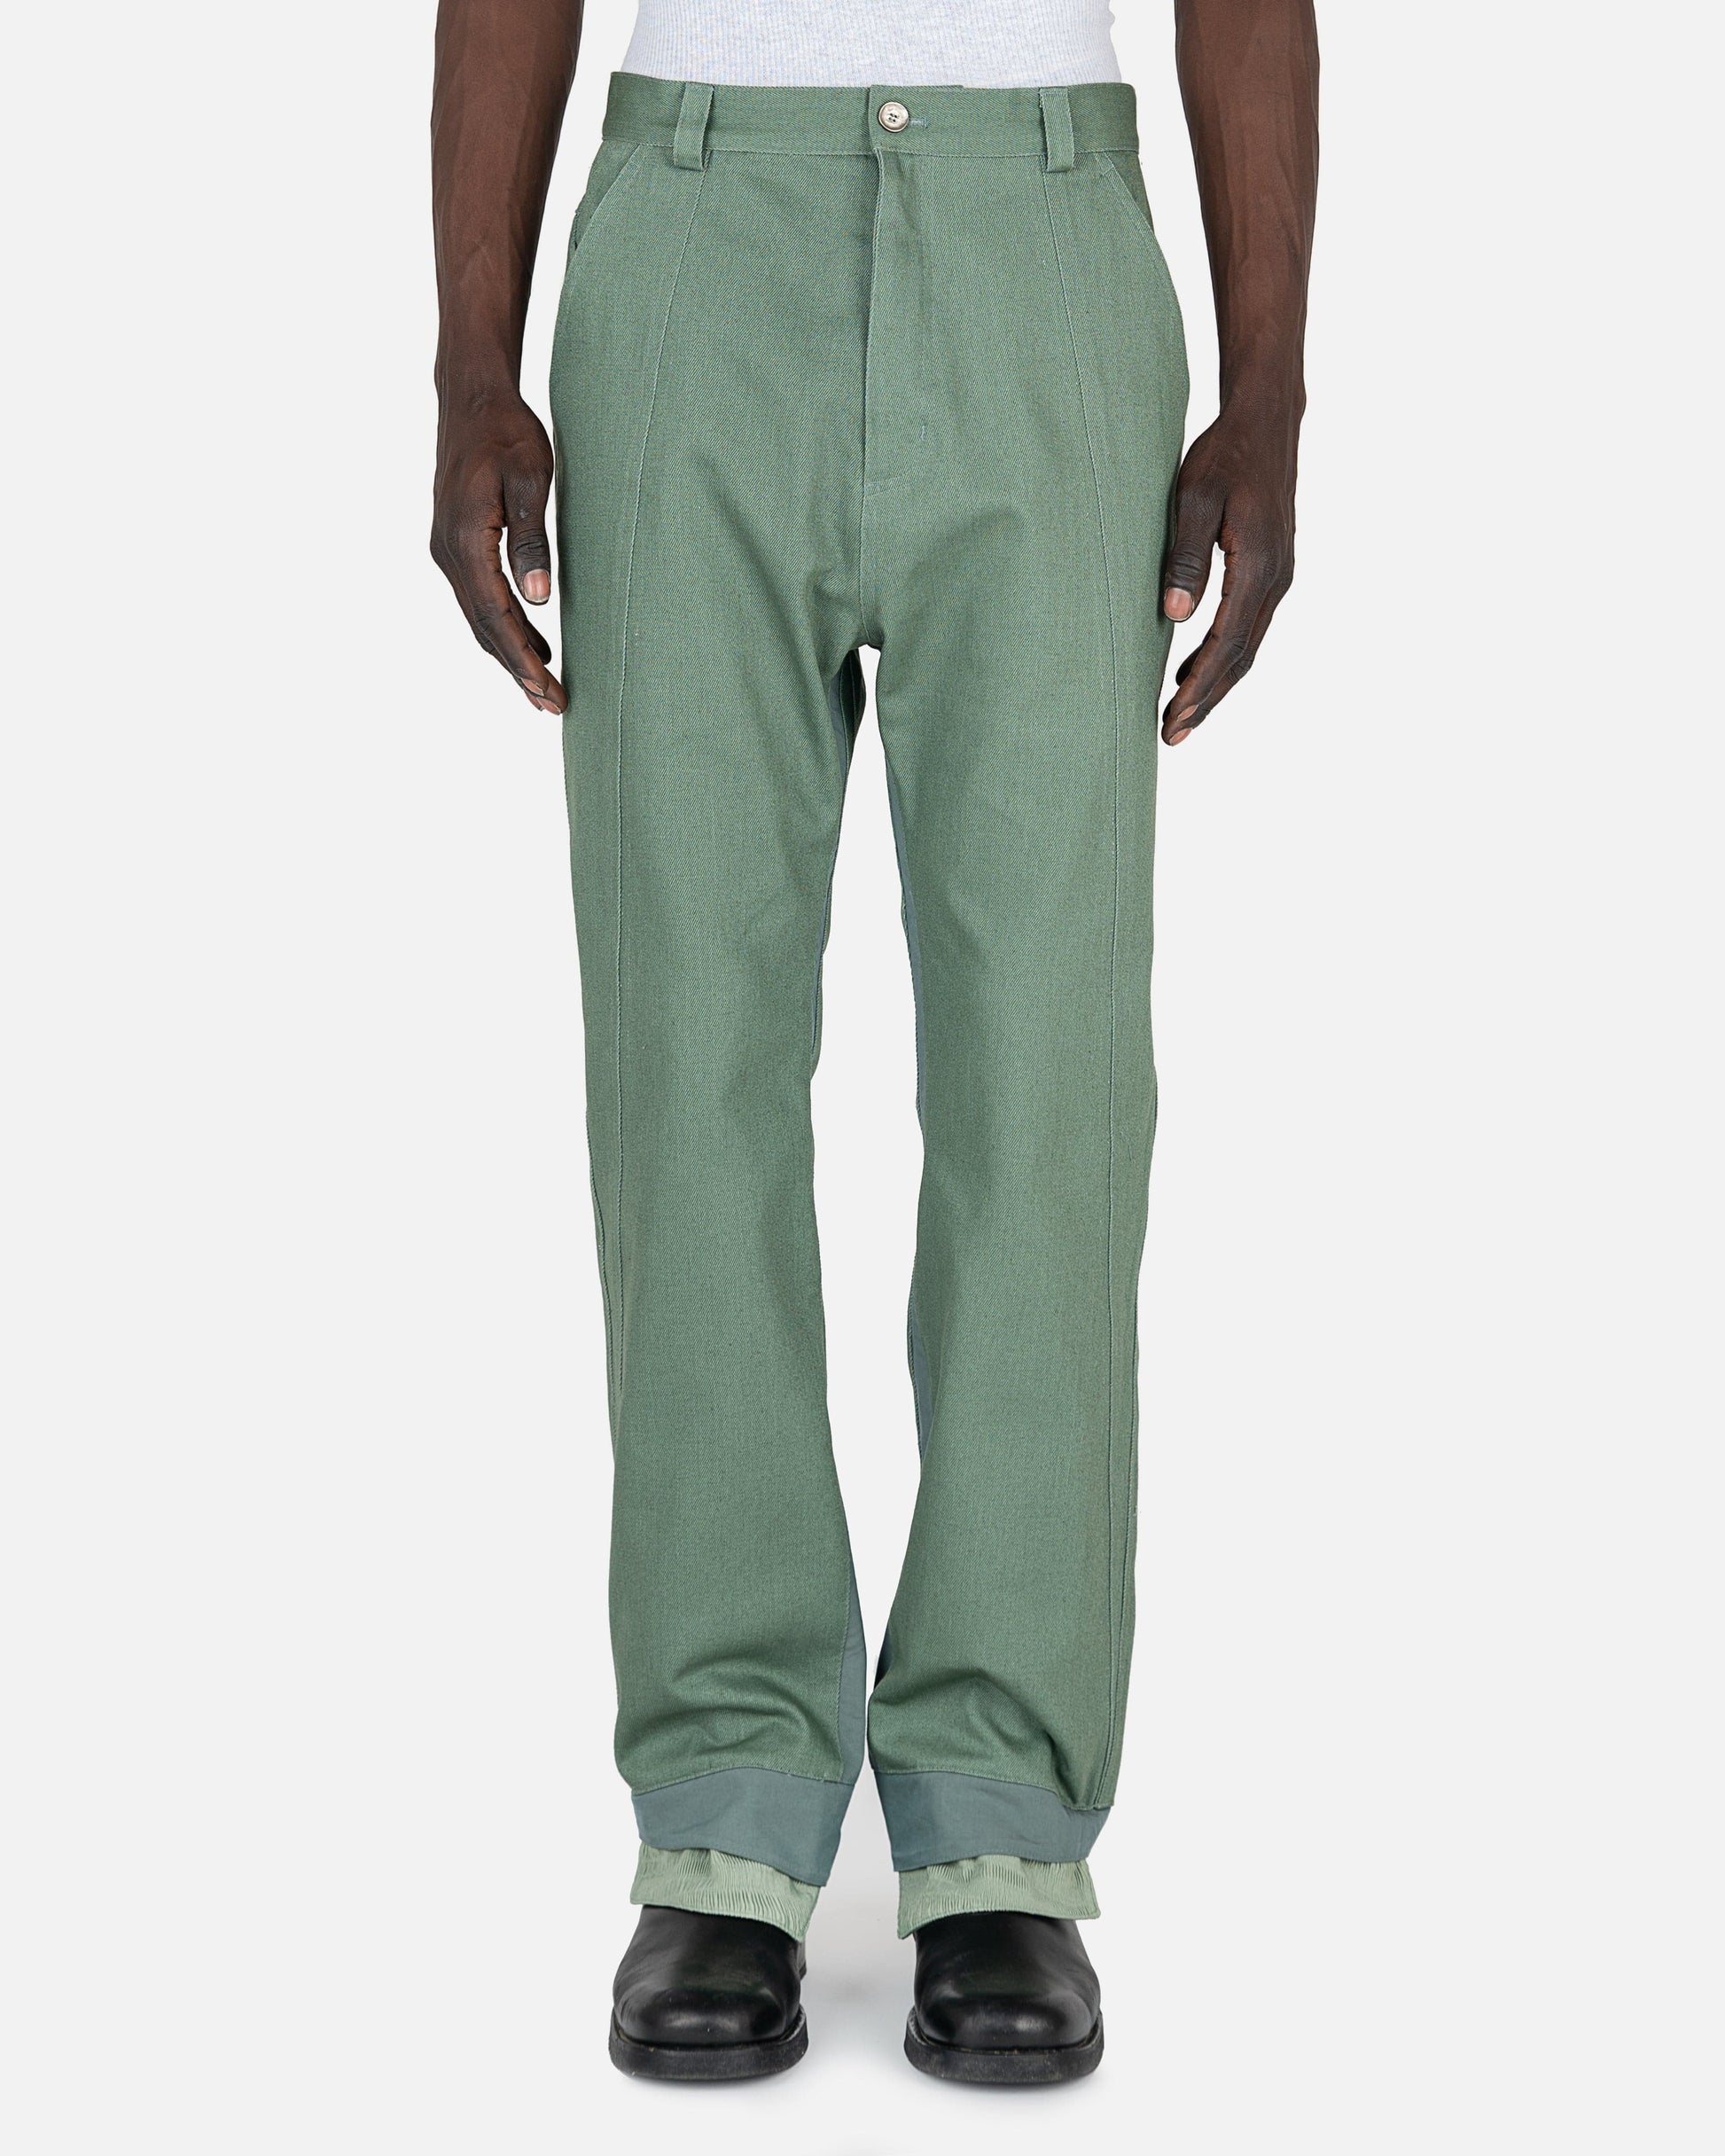 Green Ep. SVRN – 2 04 in Trousers